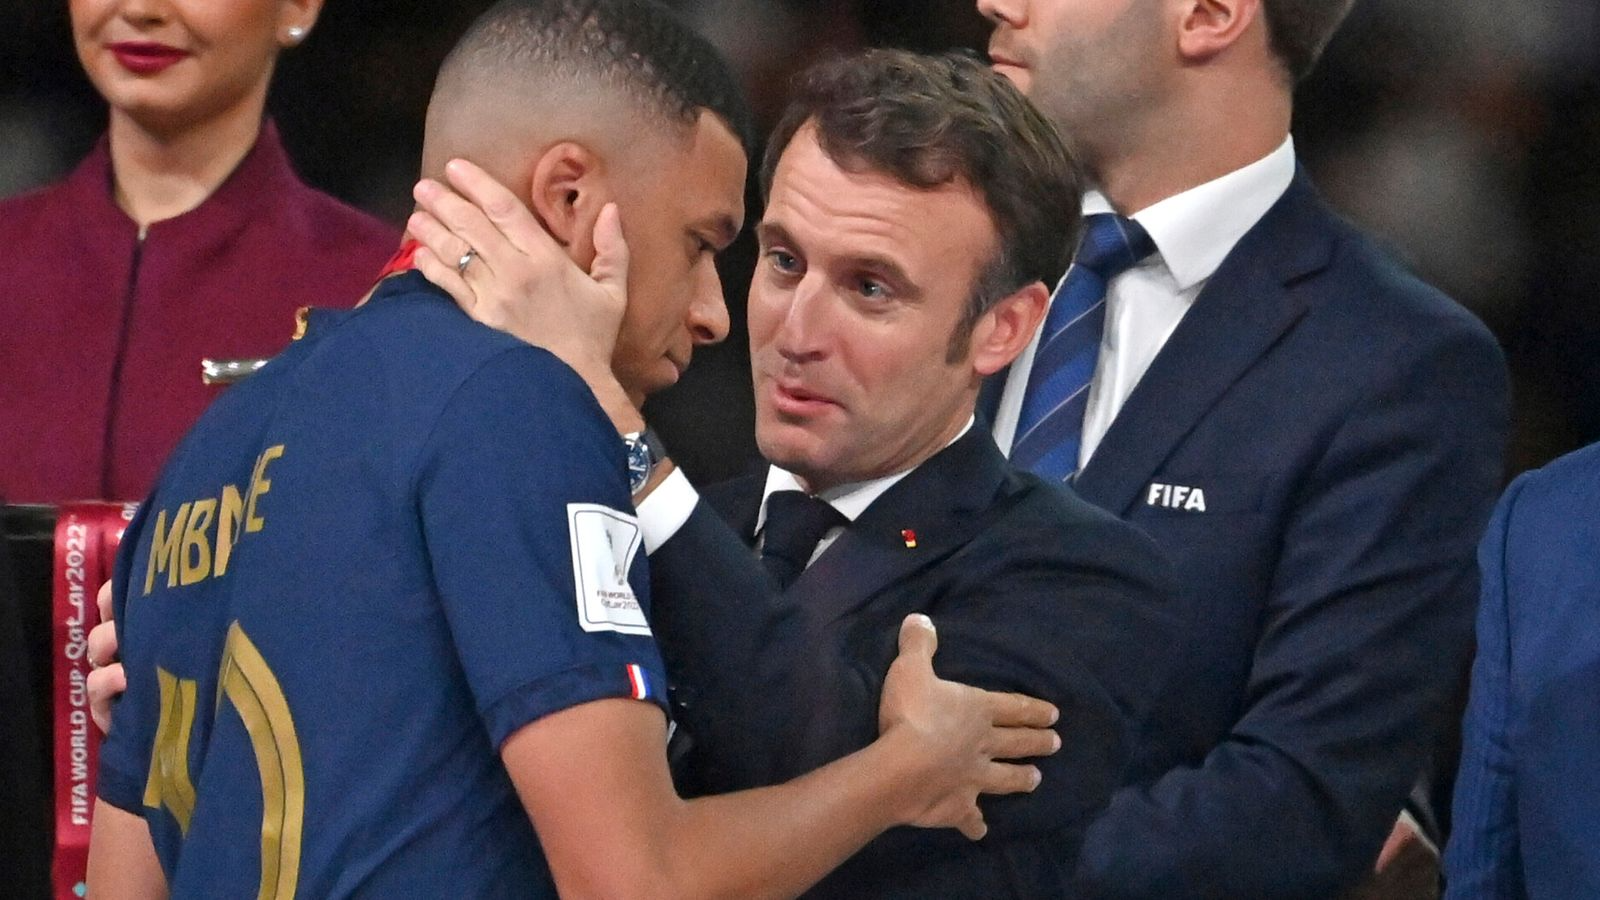 El Debate: French President Macron Once Again Persuades Mbappé To Extend Contract With PSG